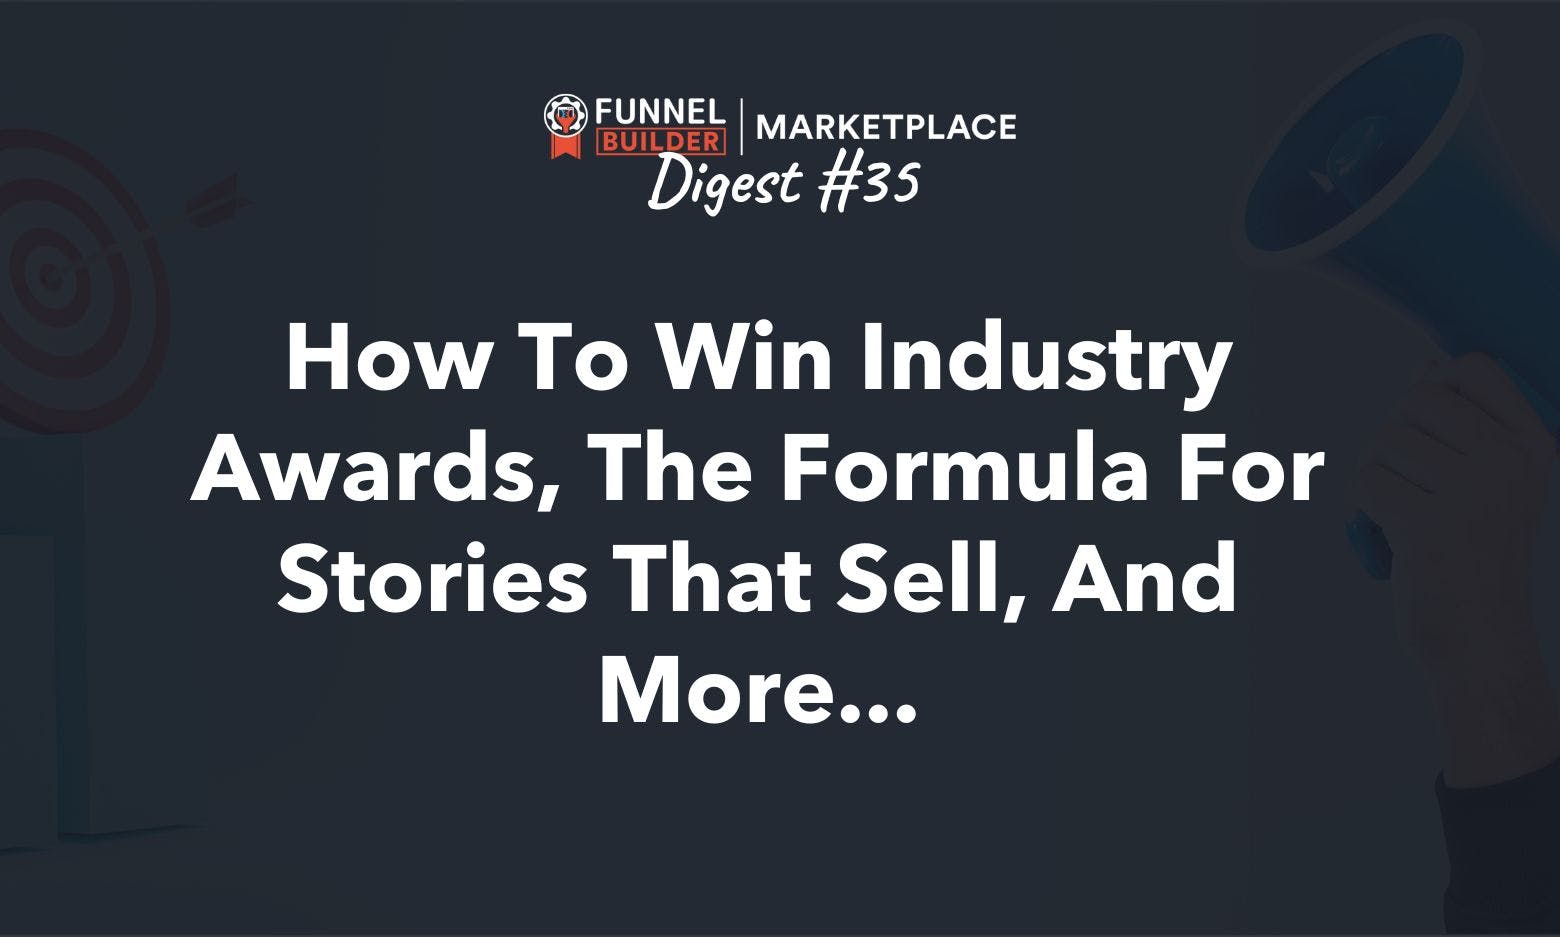 FBM Digest #35: How to win industry awards, the formula for stories that sell, and more...